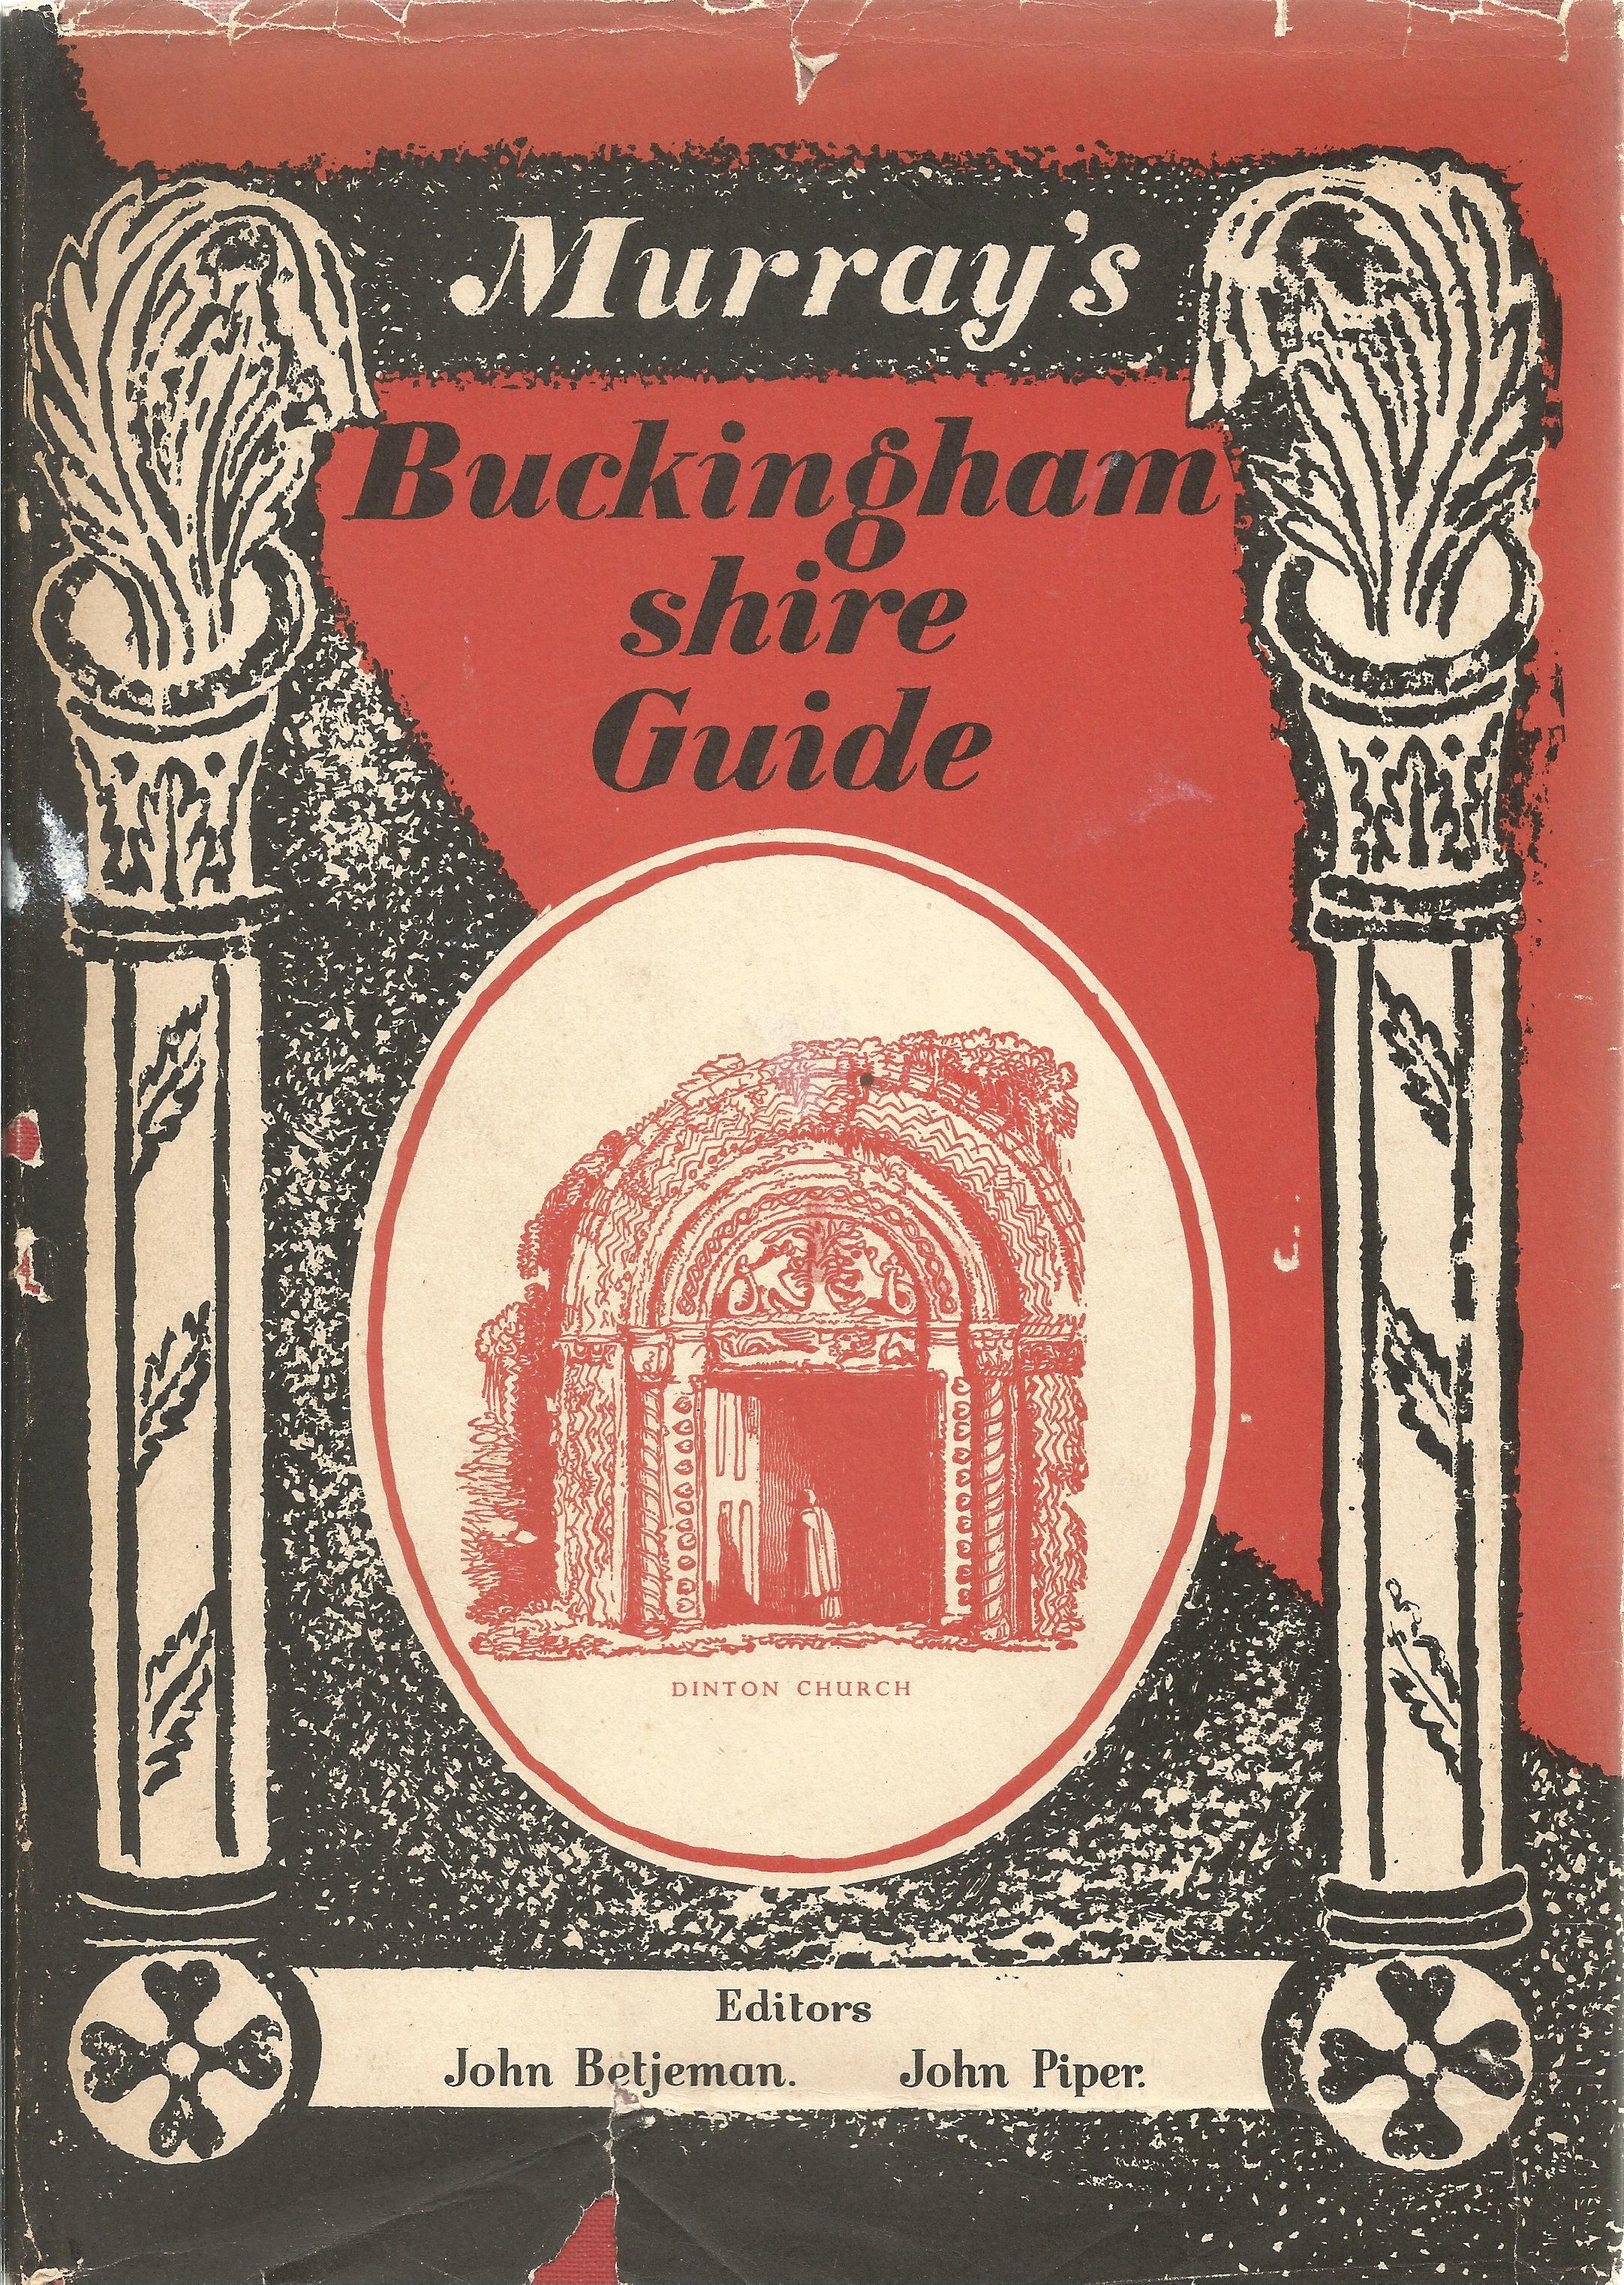 Murray's Buckinghamshire Architectural Guide edited by John Betjeman and John Piper 1948 First